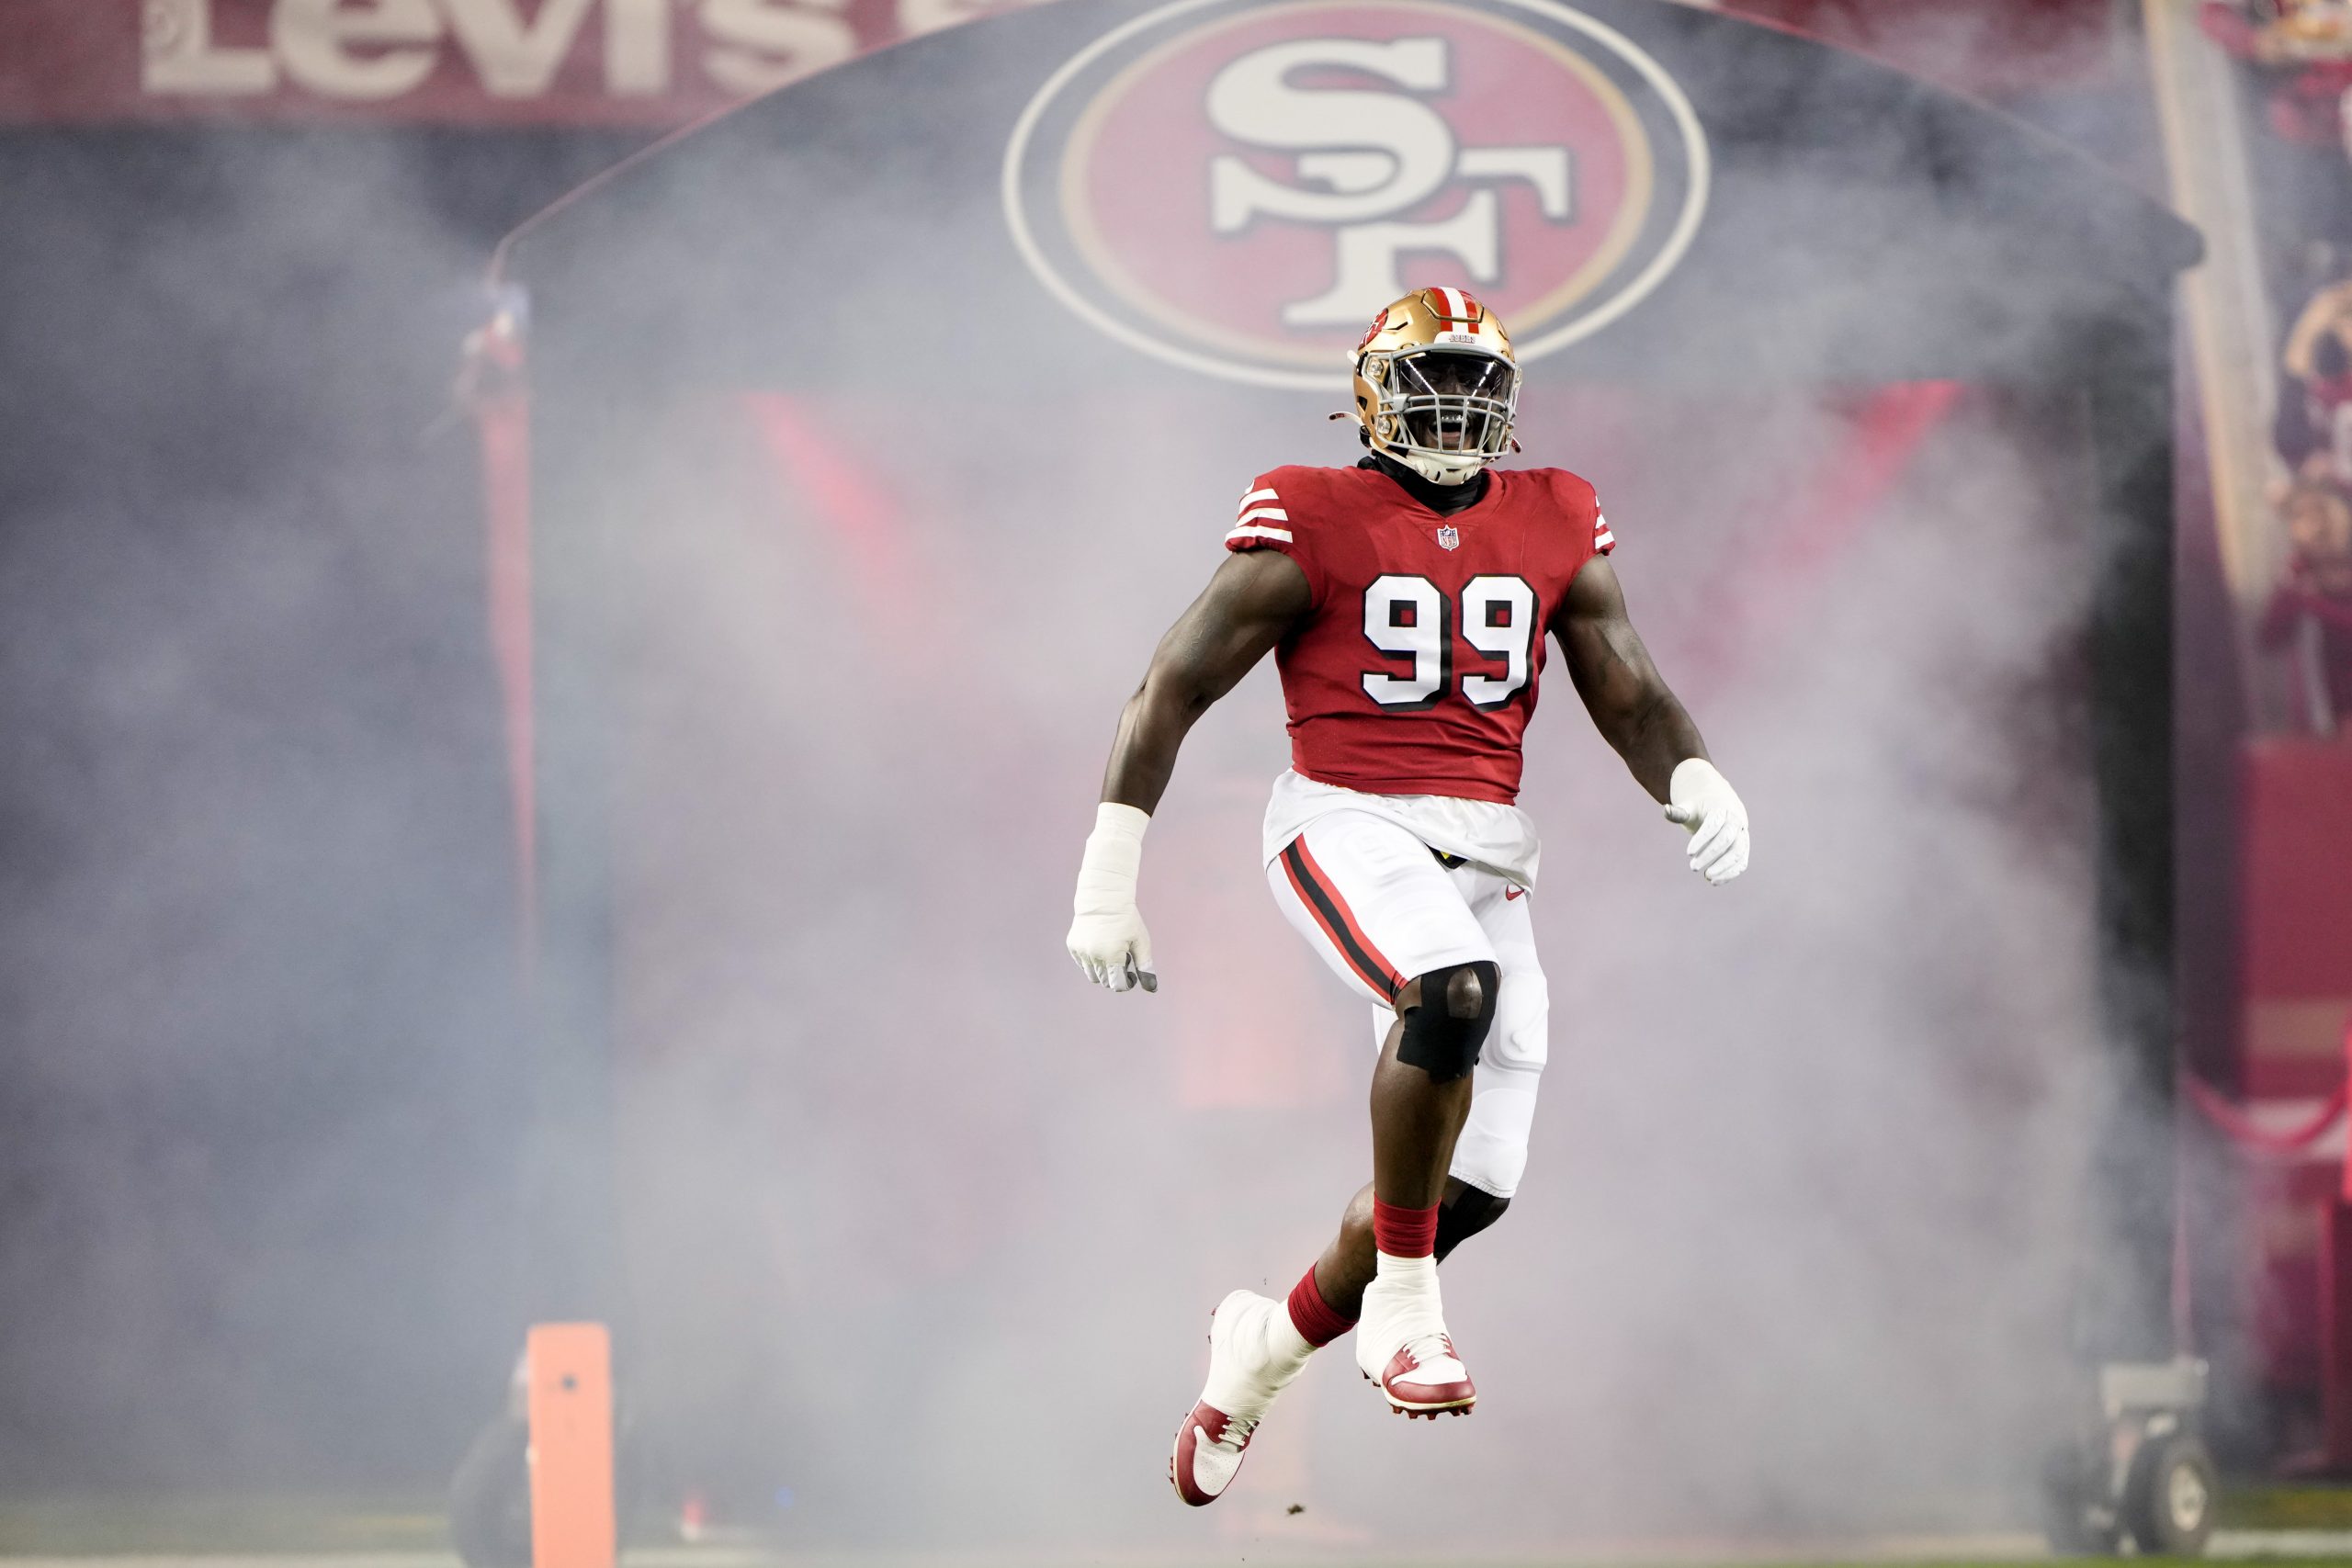 Javon Kinlaw #99 of the San Francisco 49ers jumps while running onto the field prior to a game agai...